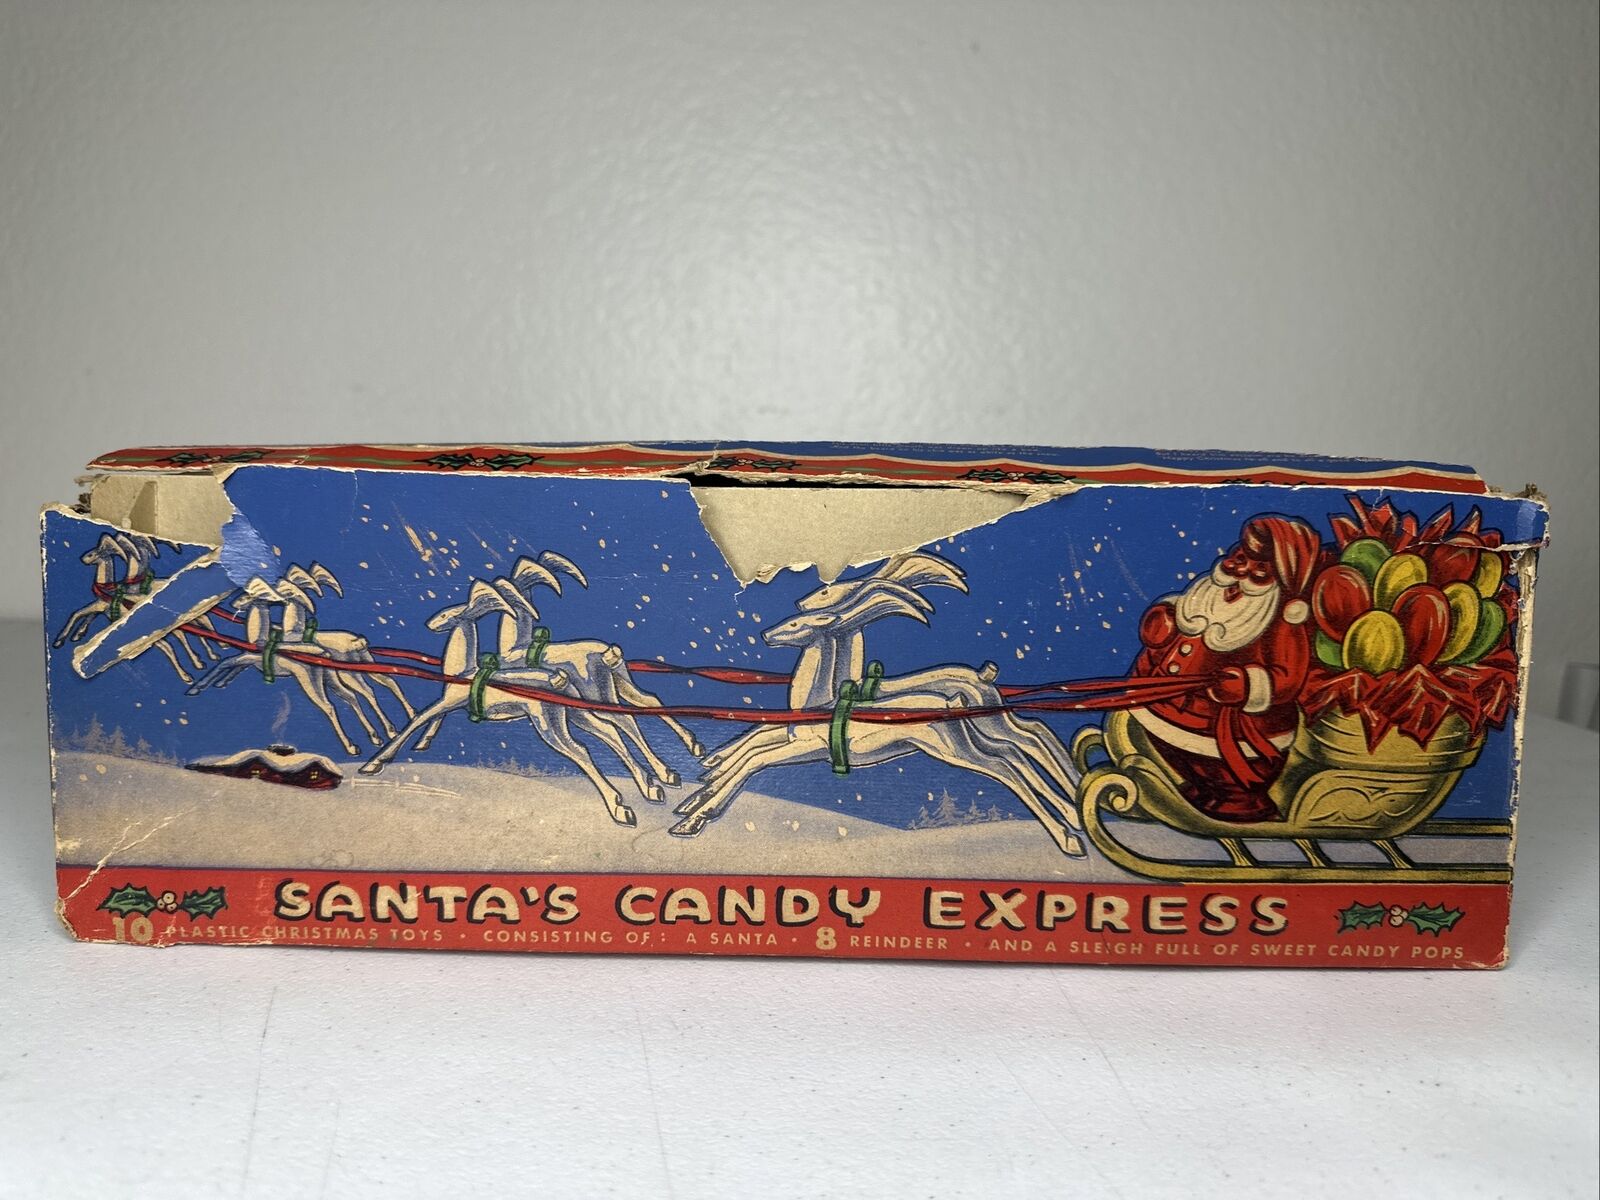 Vintage 1950s Santa's Candy Express Plastic Toy Set with Original Box - Rare Sears Collectible - TreasuTiques